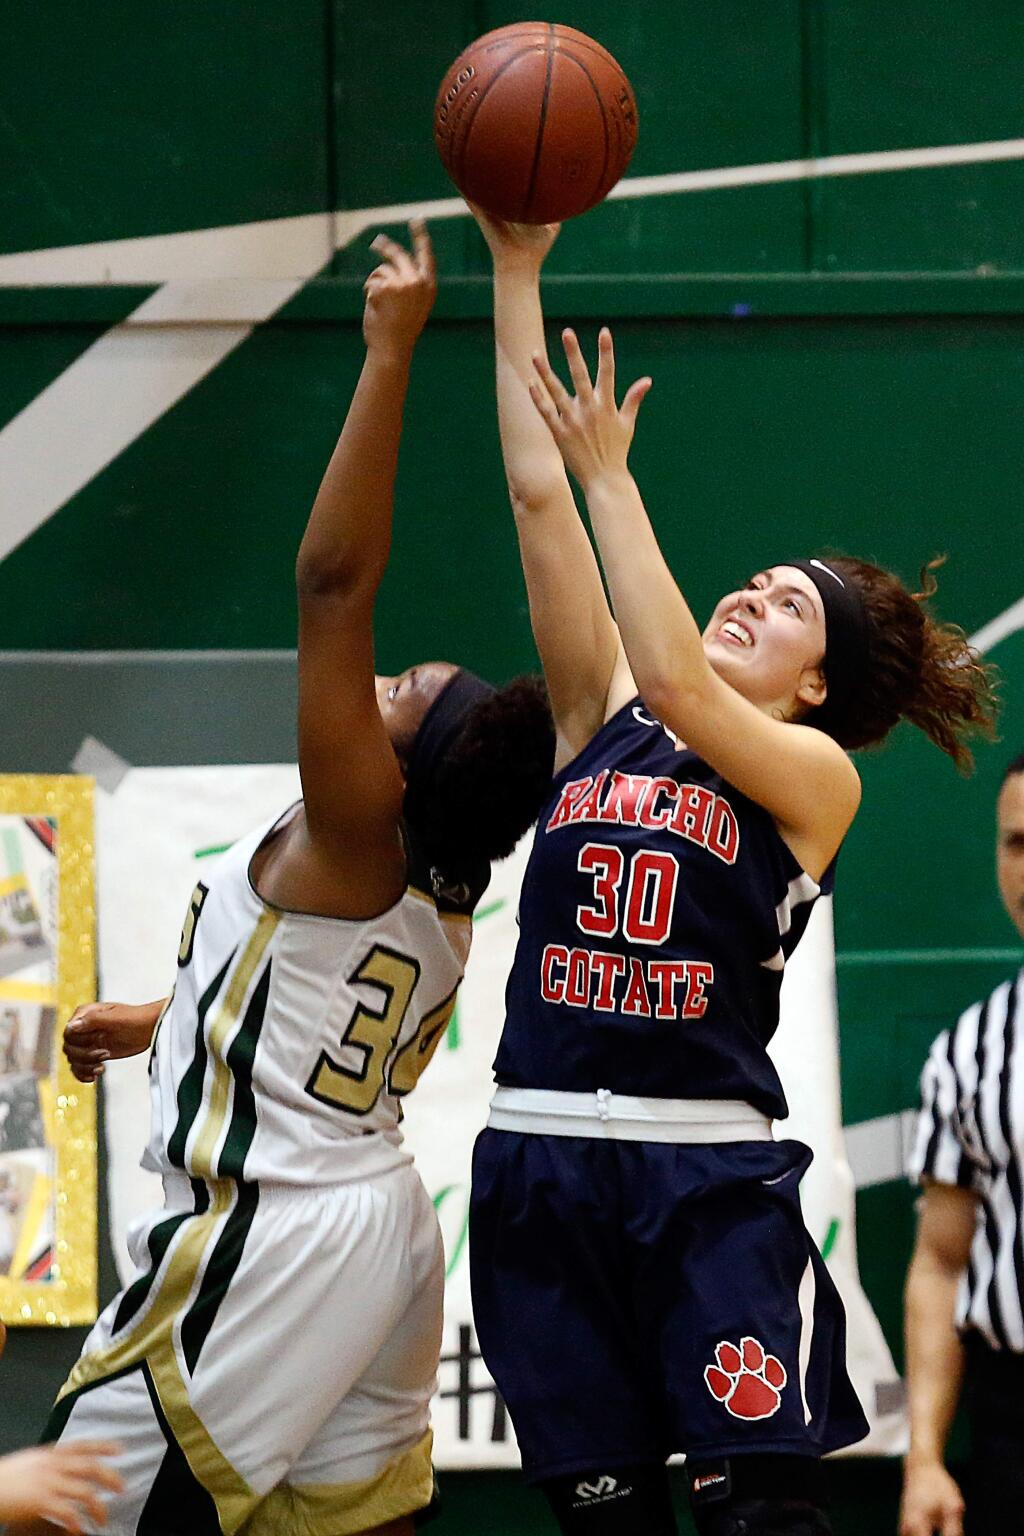 Rancho Cotate's Camille Spackman (30), right, knocks a rebound away from Maria Carrillo's Harriet Ikandu (34) during the second half of a girls varsity basketball game between Rancho Cotate and Maria Carillo high schools, in Santa Rosa, California, on Thursday, February 8, 2018. (Alvin Jornada / The Press Democrat)